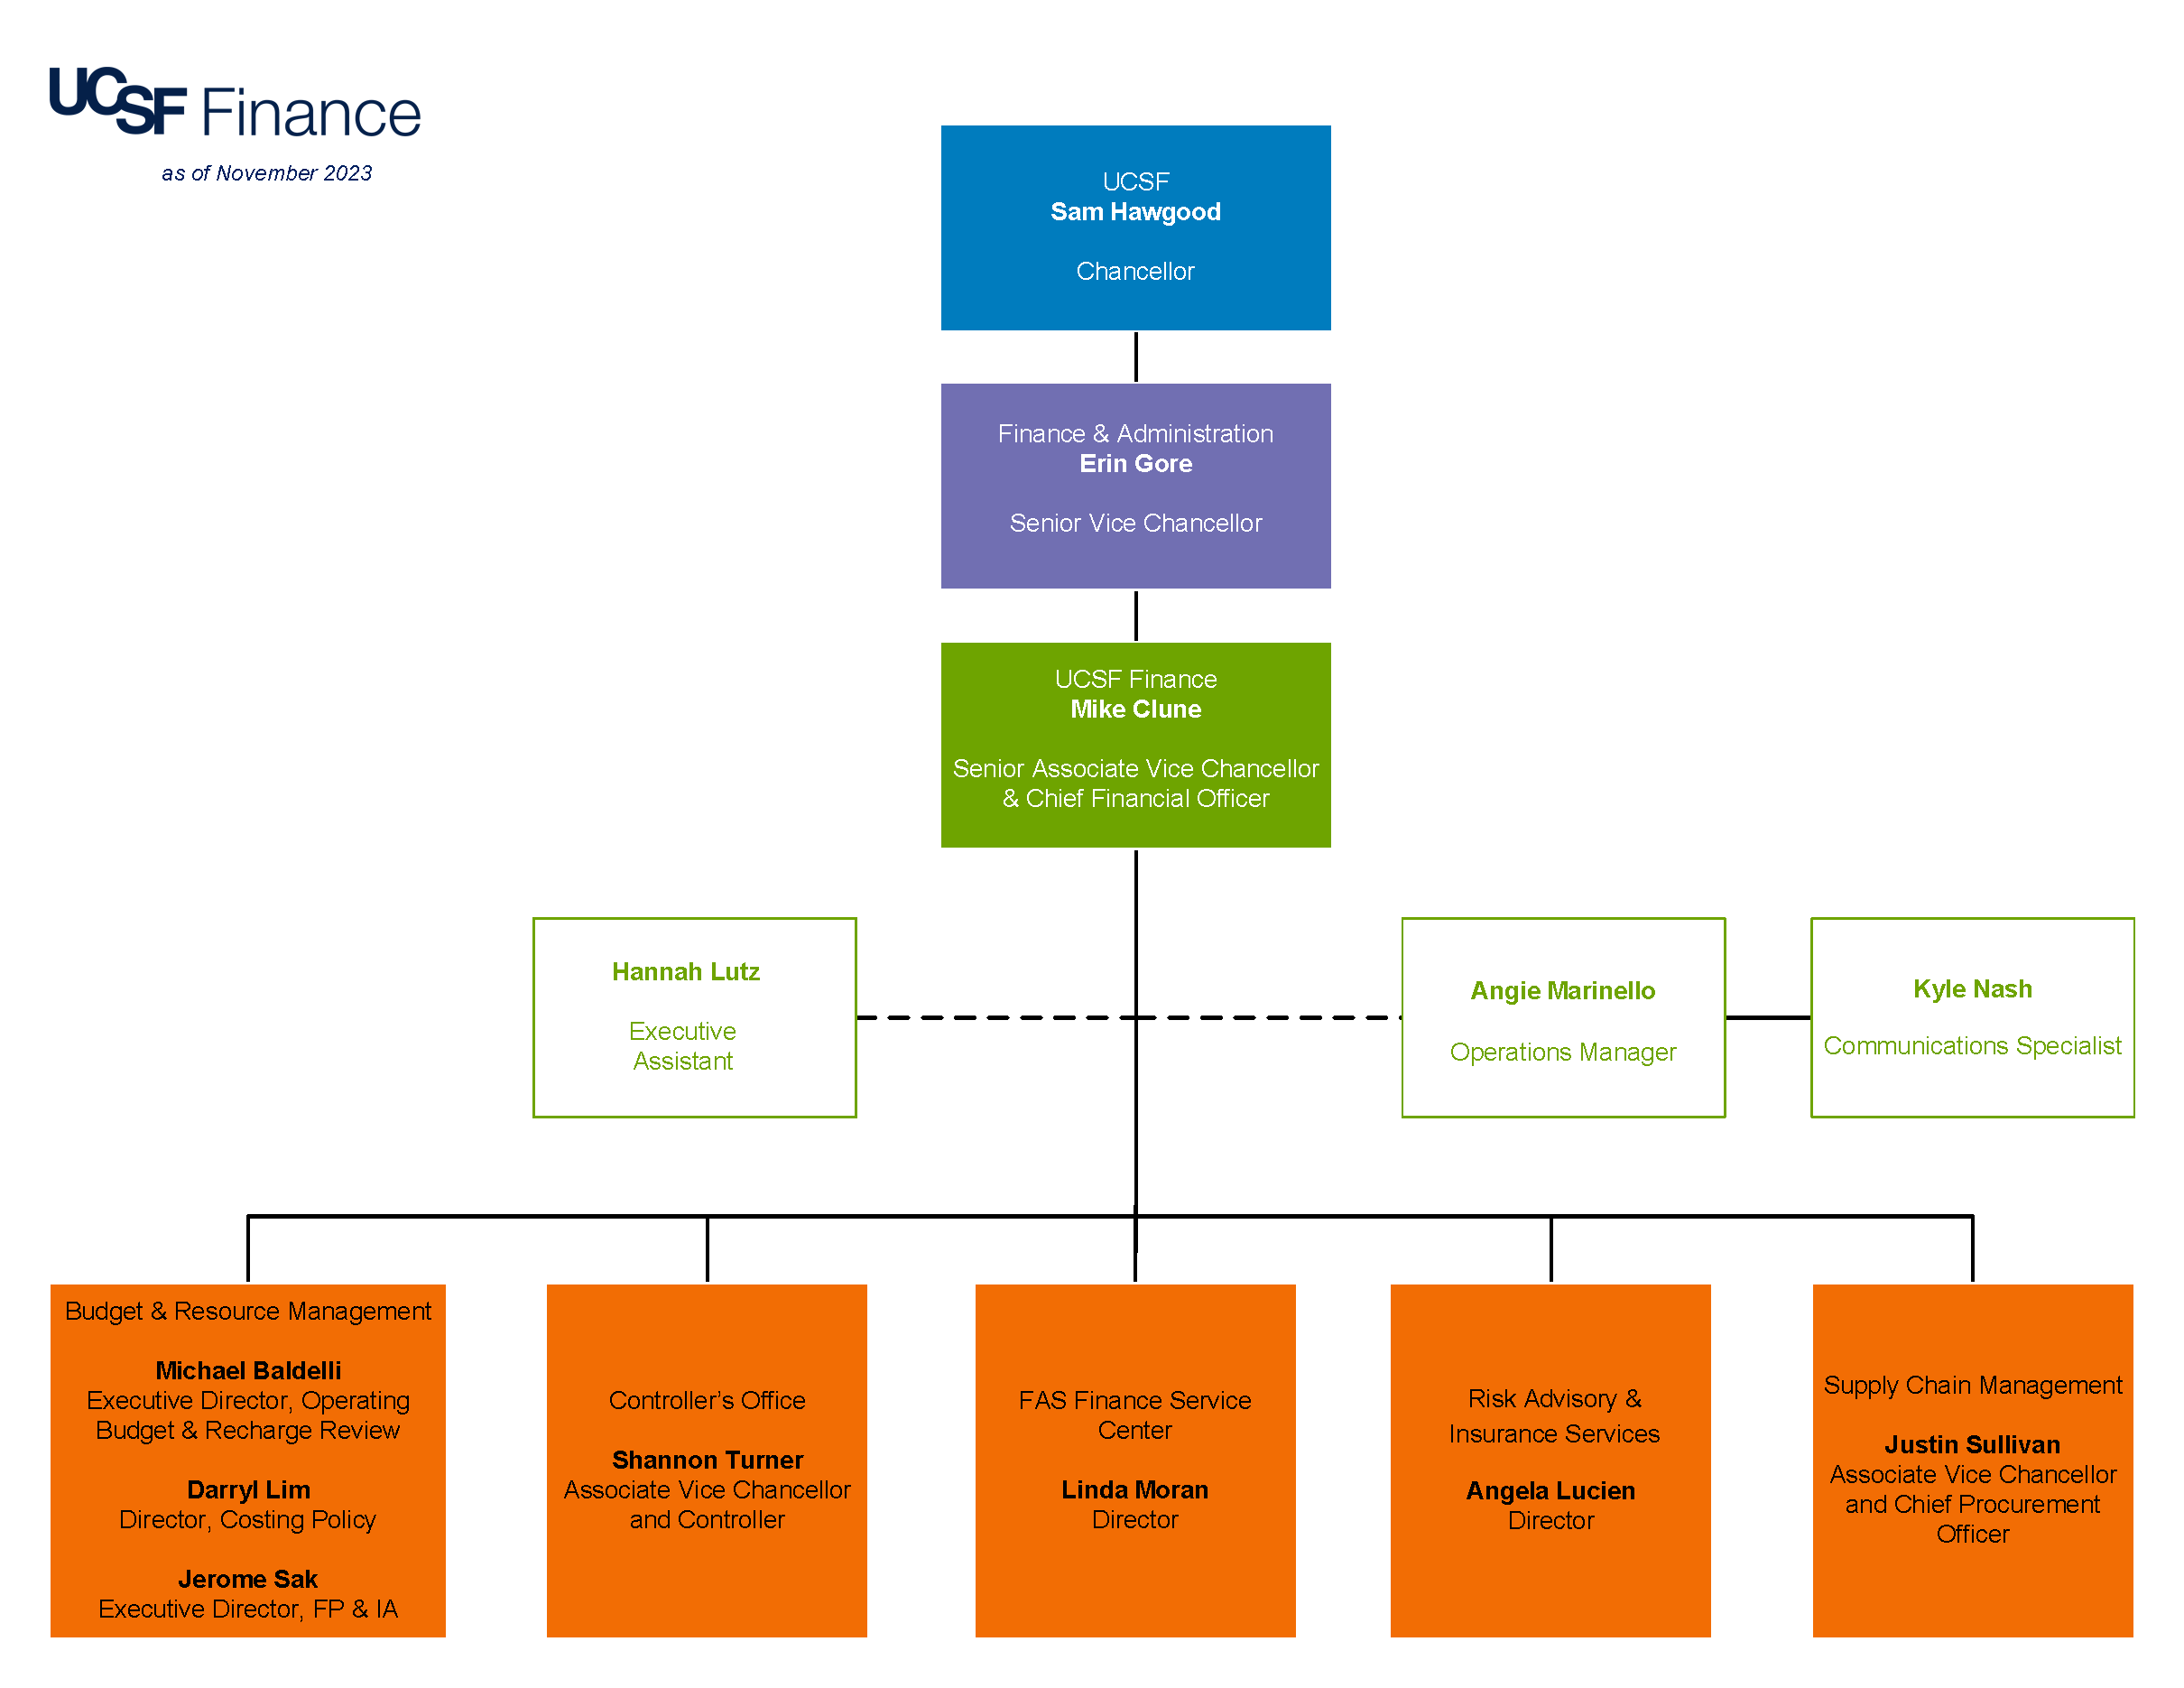 UCSF Finance organization chart image. Click image to access the PDF version.